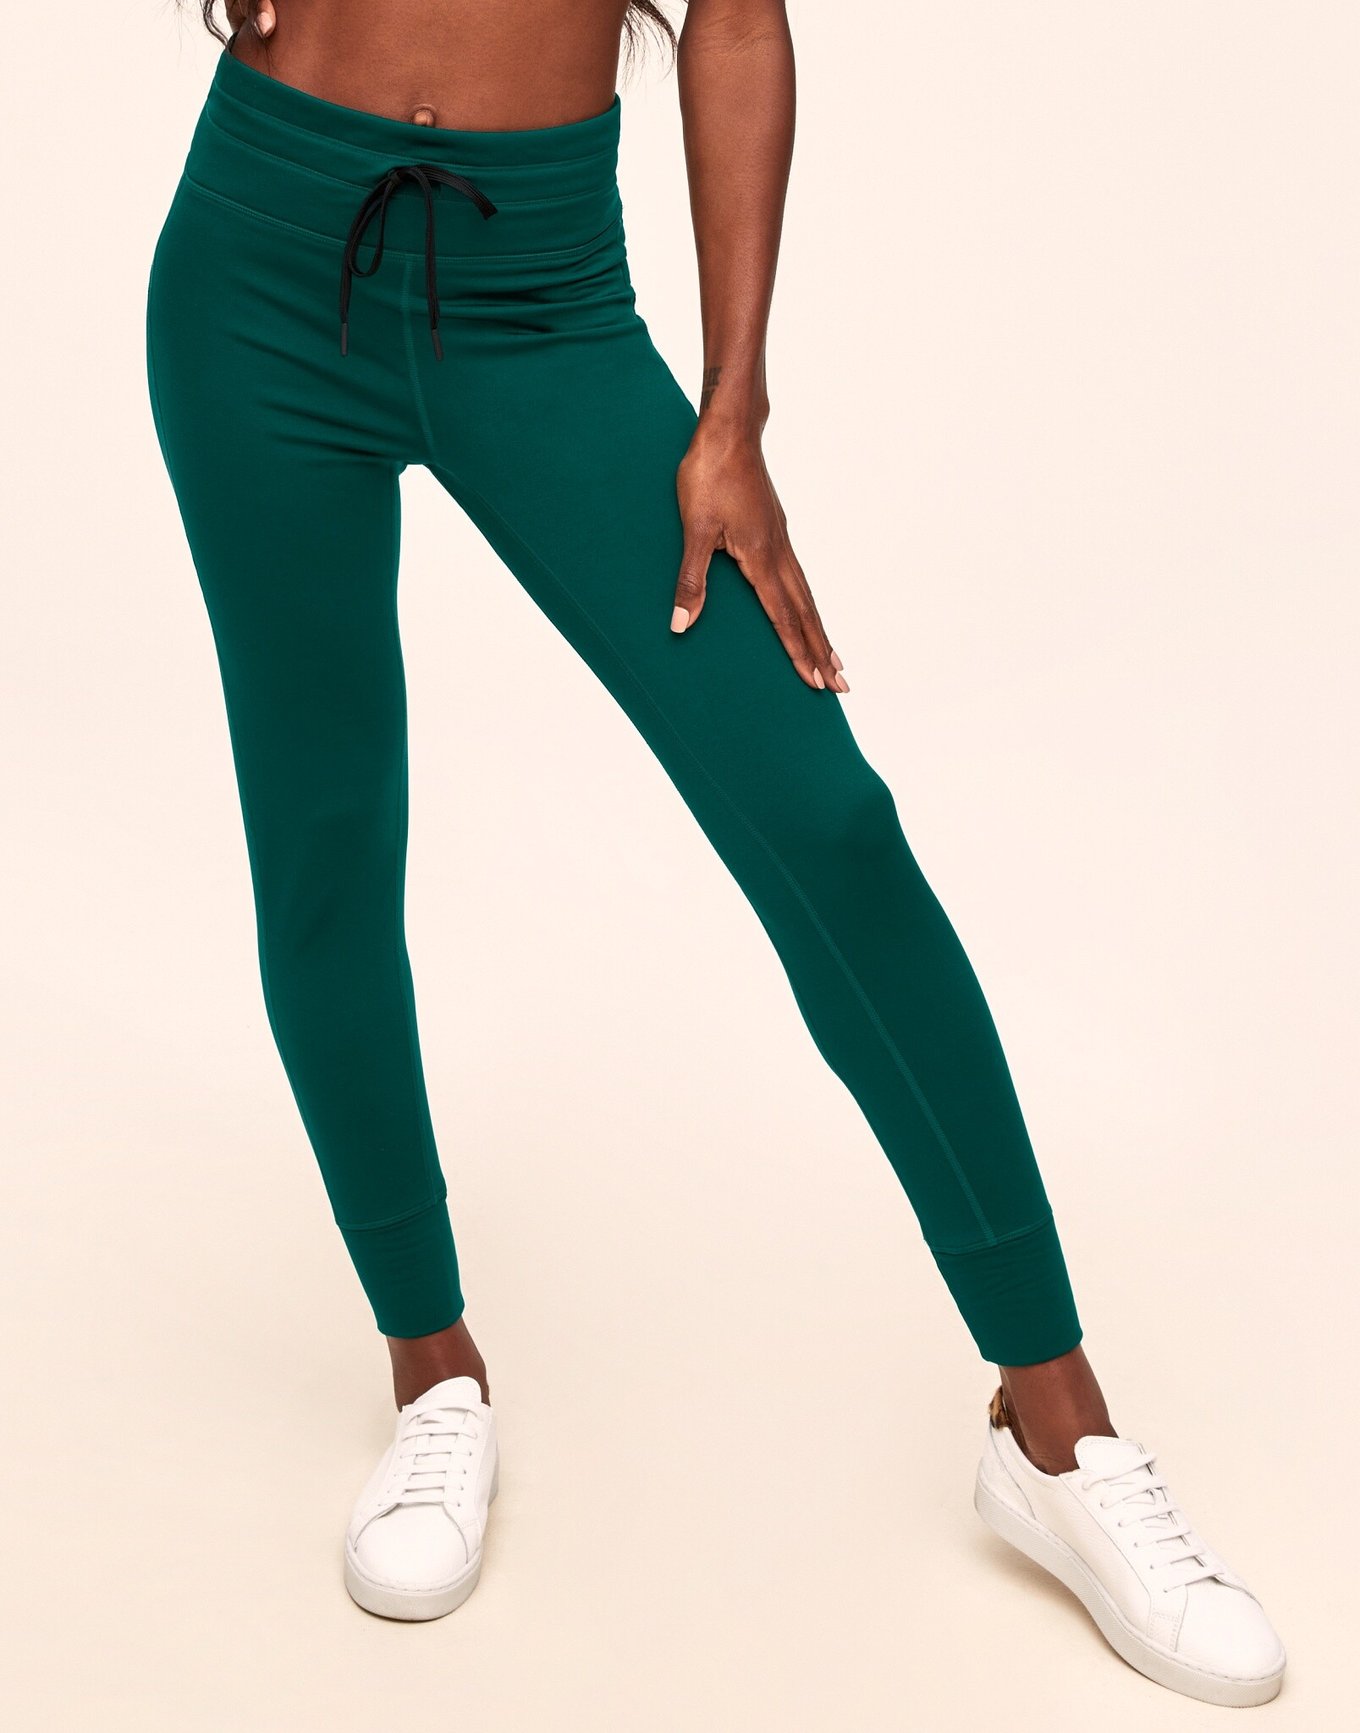 These 'Toasty' and 'Secure' Fleece-Lined Leggings Are on Sale at Amazon